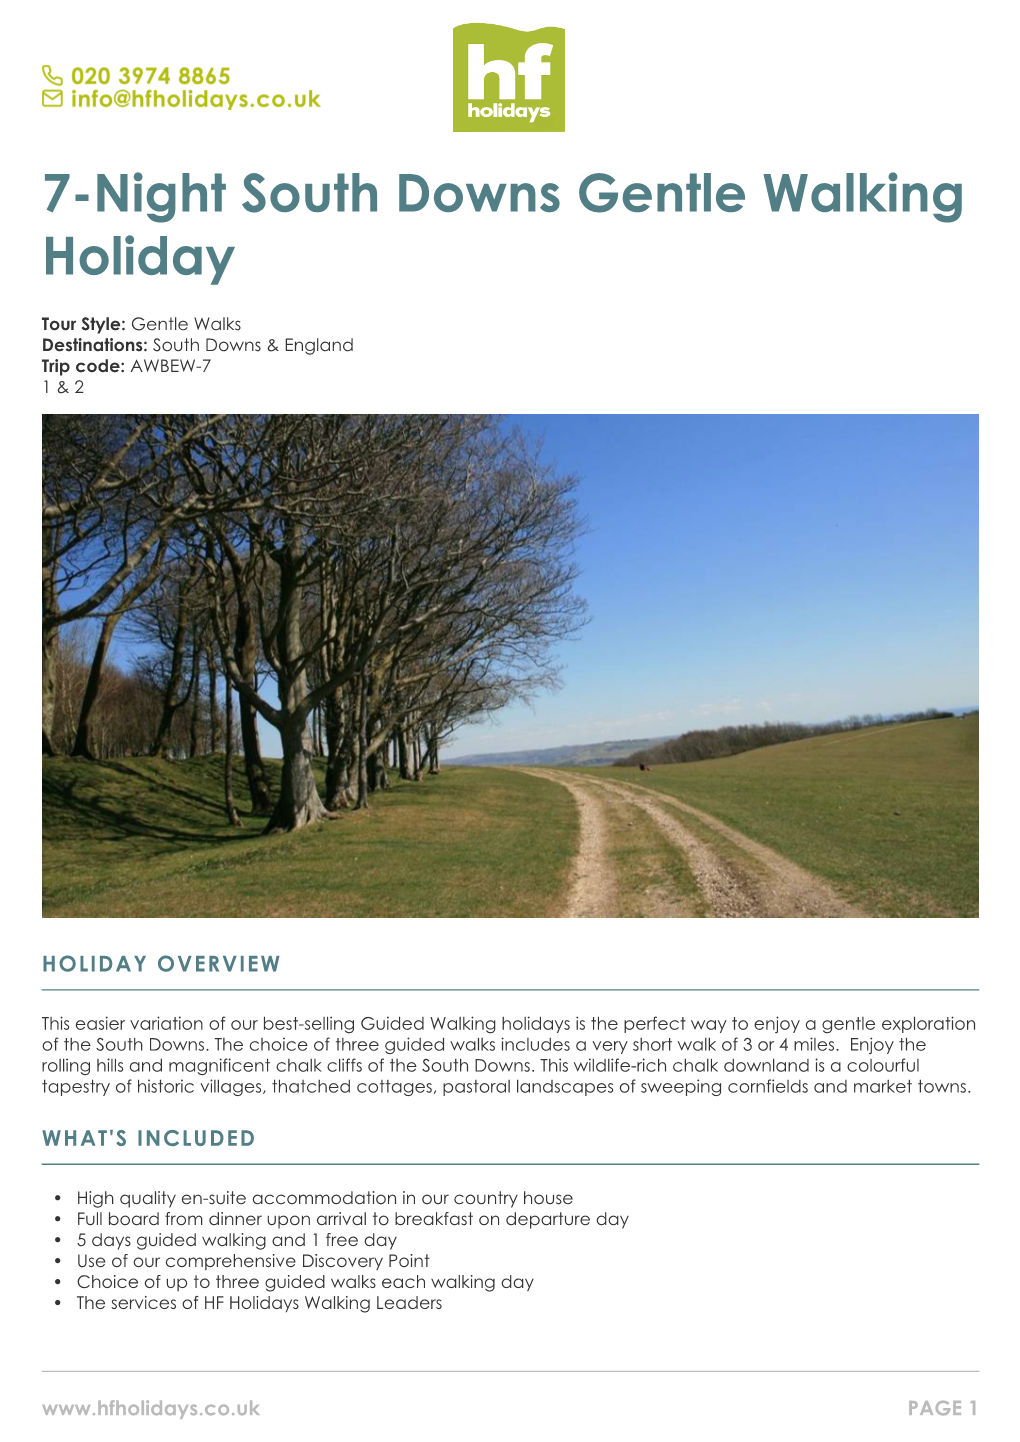 7-Night South Downs Gentle Walking Holiday